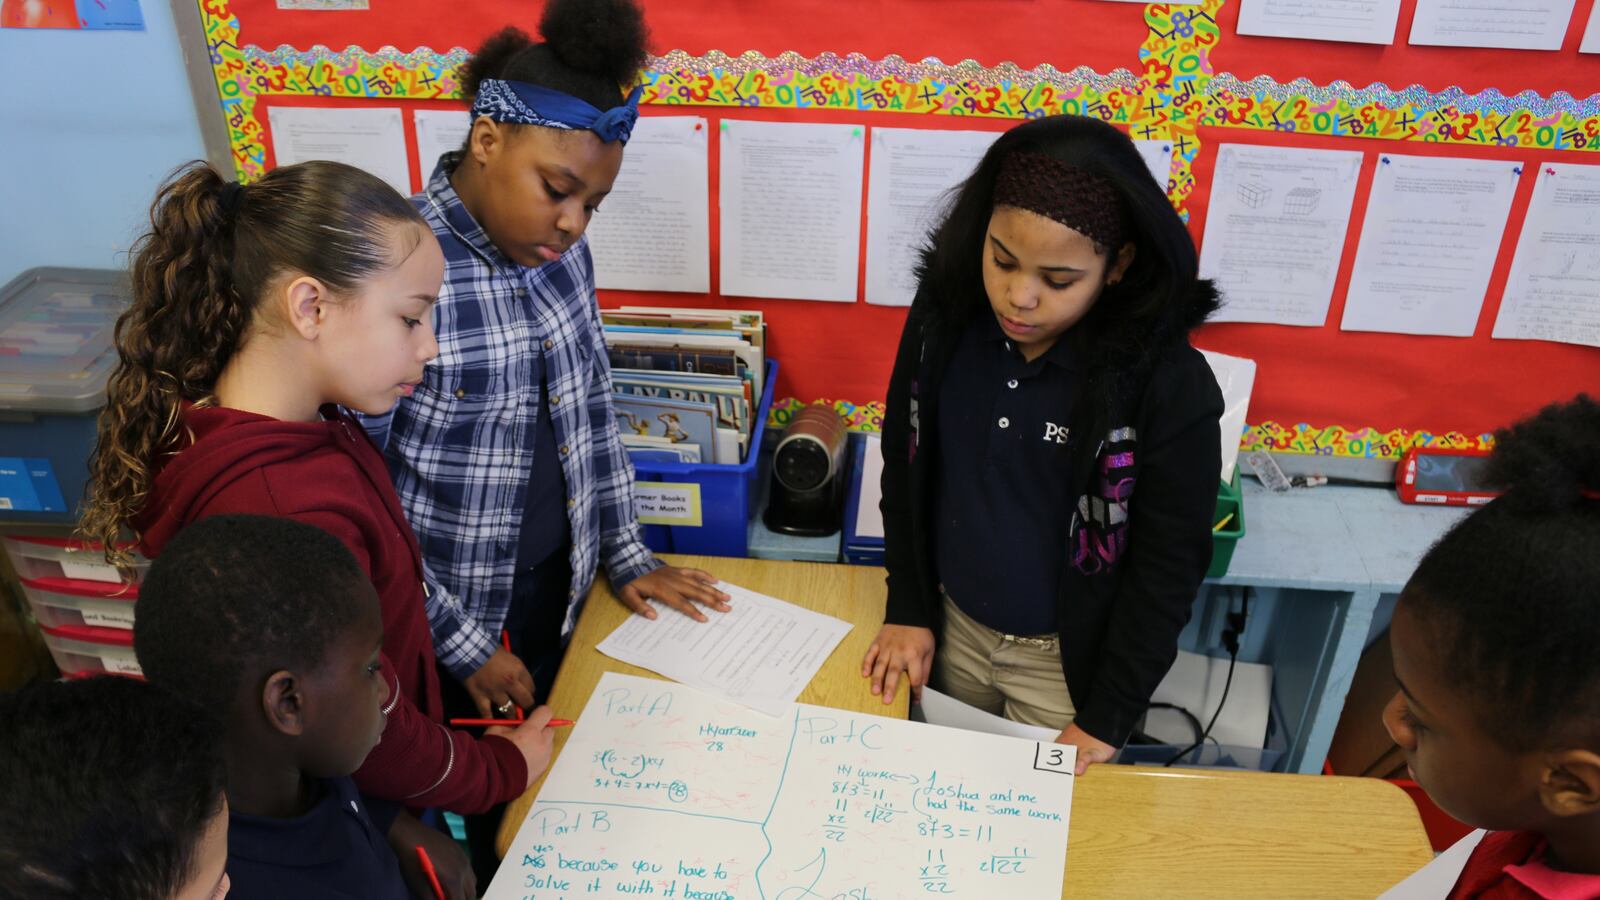 Fifth-grade students at P.S. 294 in the Bronx were immersed in math problems when Chalkbeat reporter Christina Veiga visited in March.